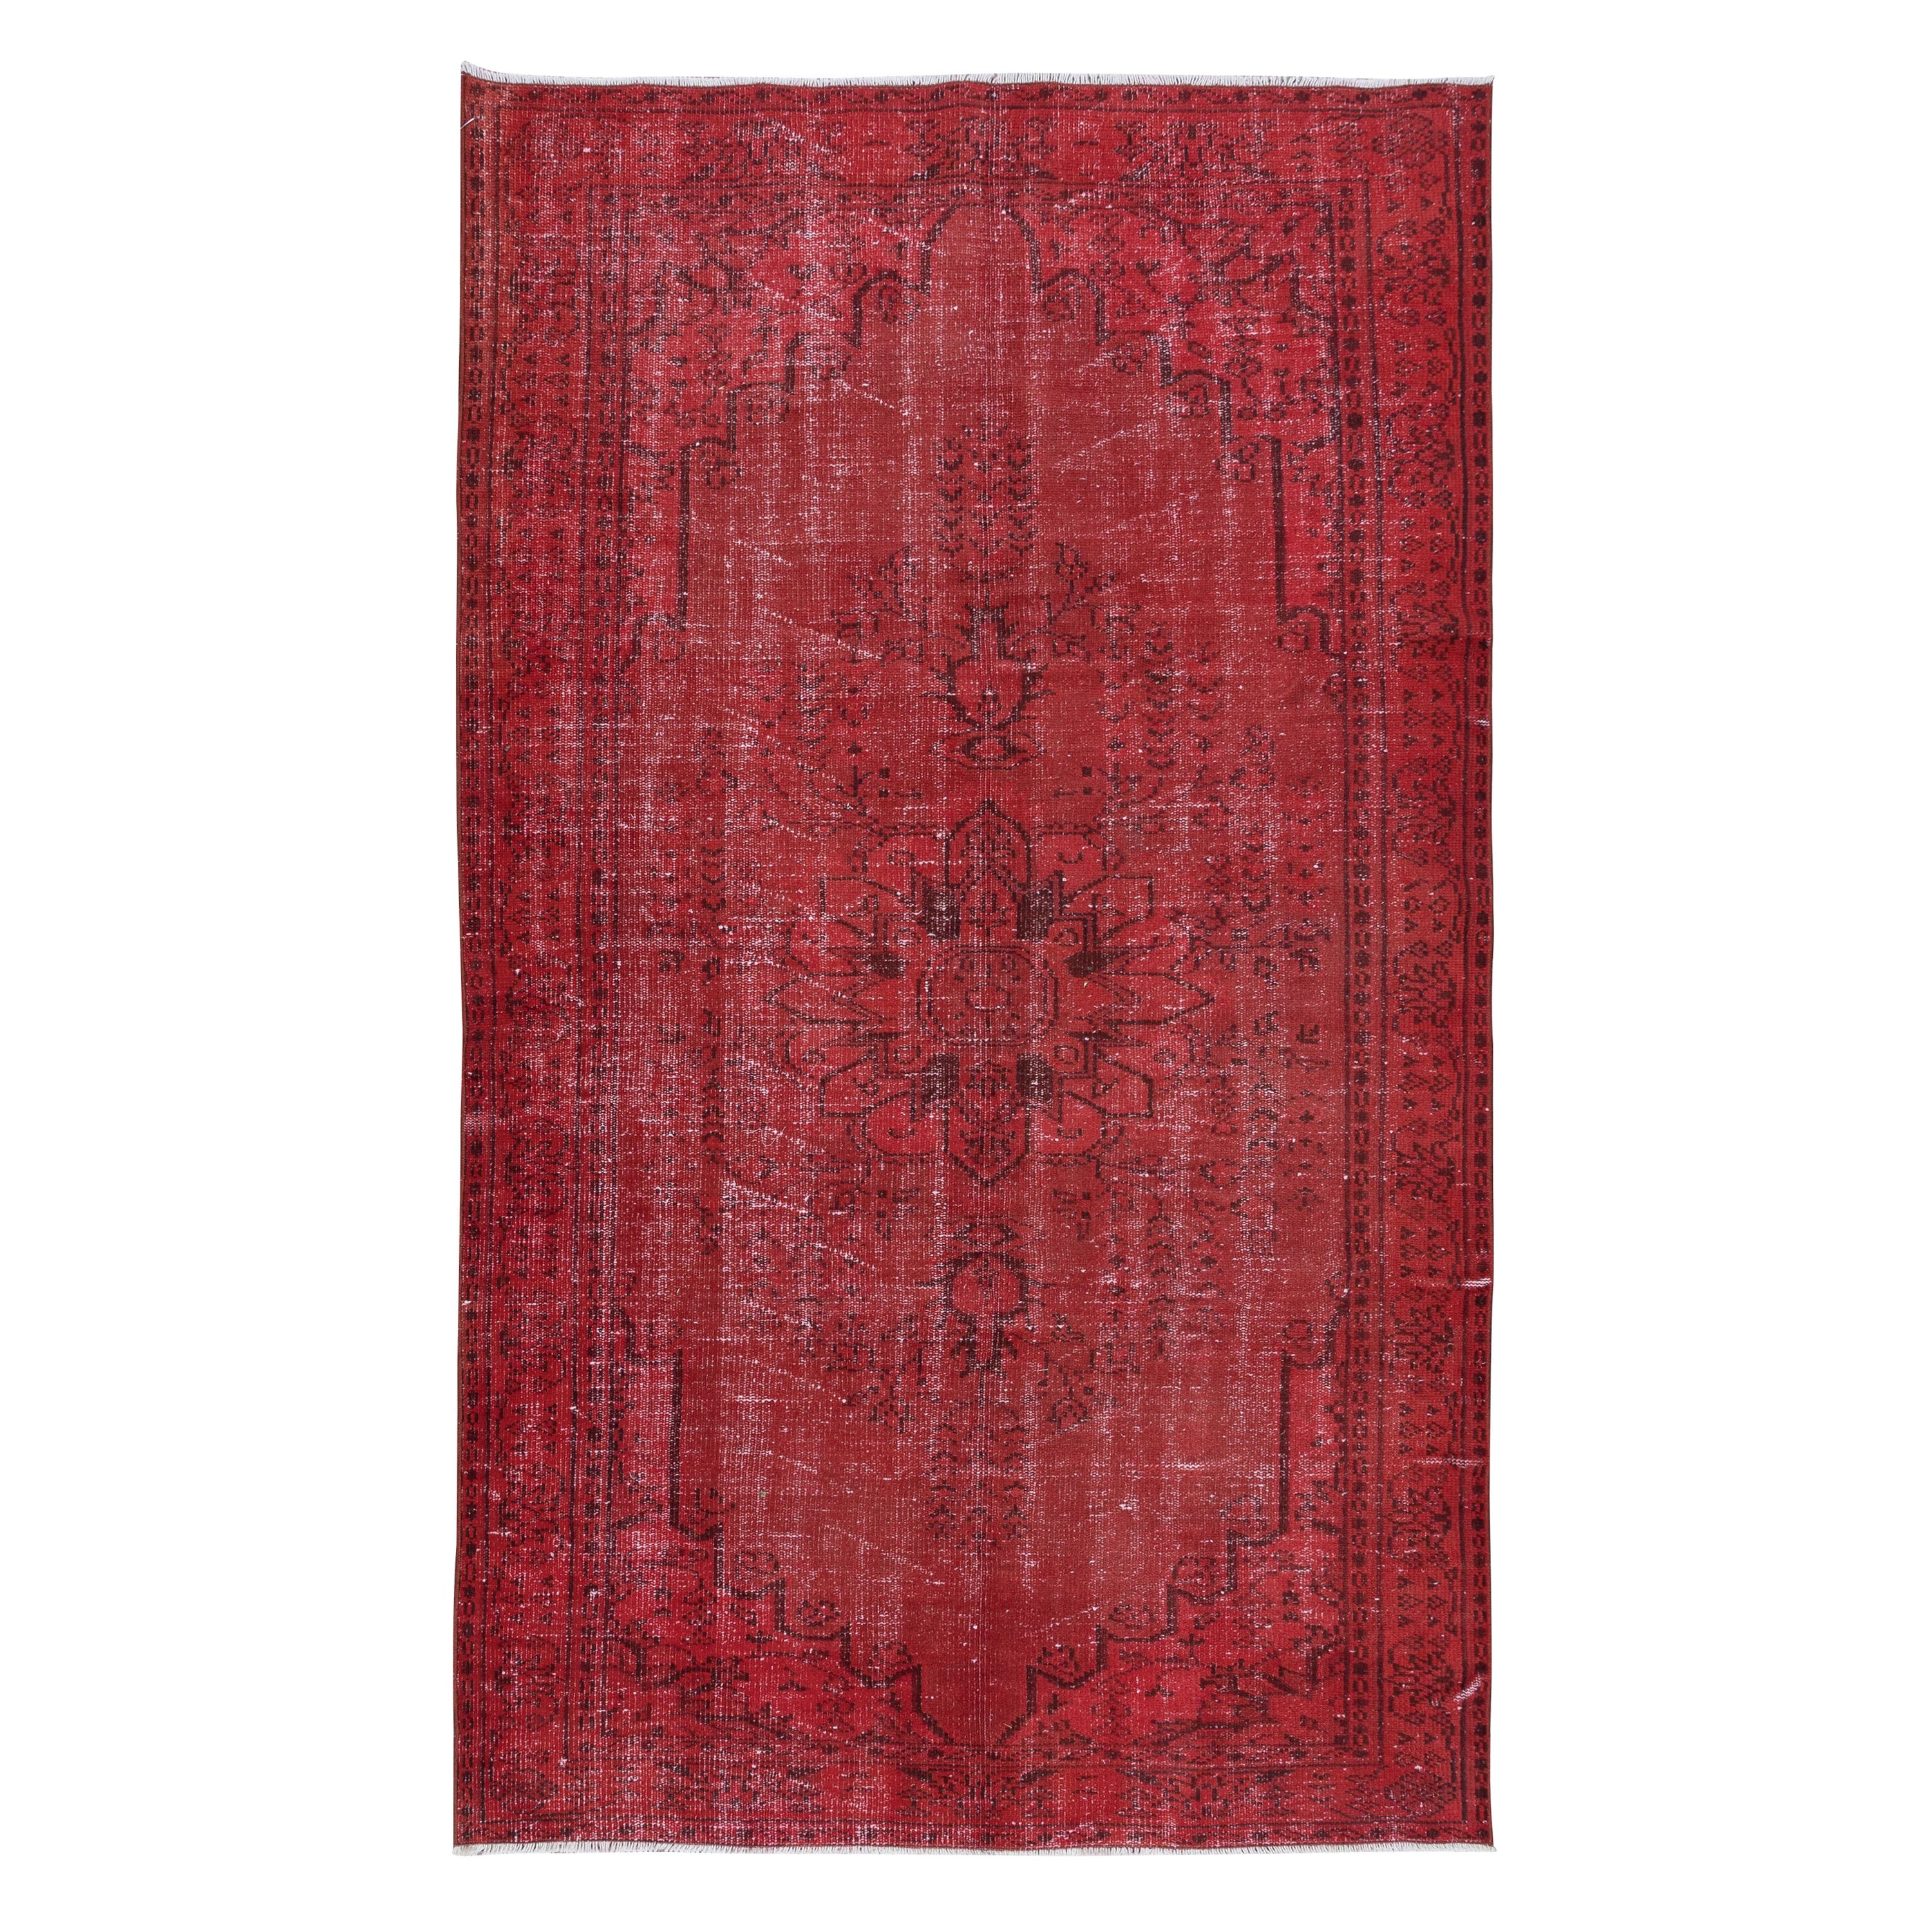 5x8.3 Ft Red Handmade Room Size Rug, Wool and Cotton Carpet from Turkey For Sale